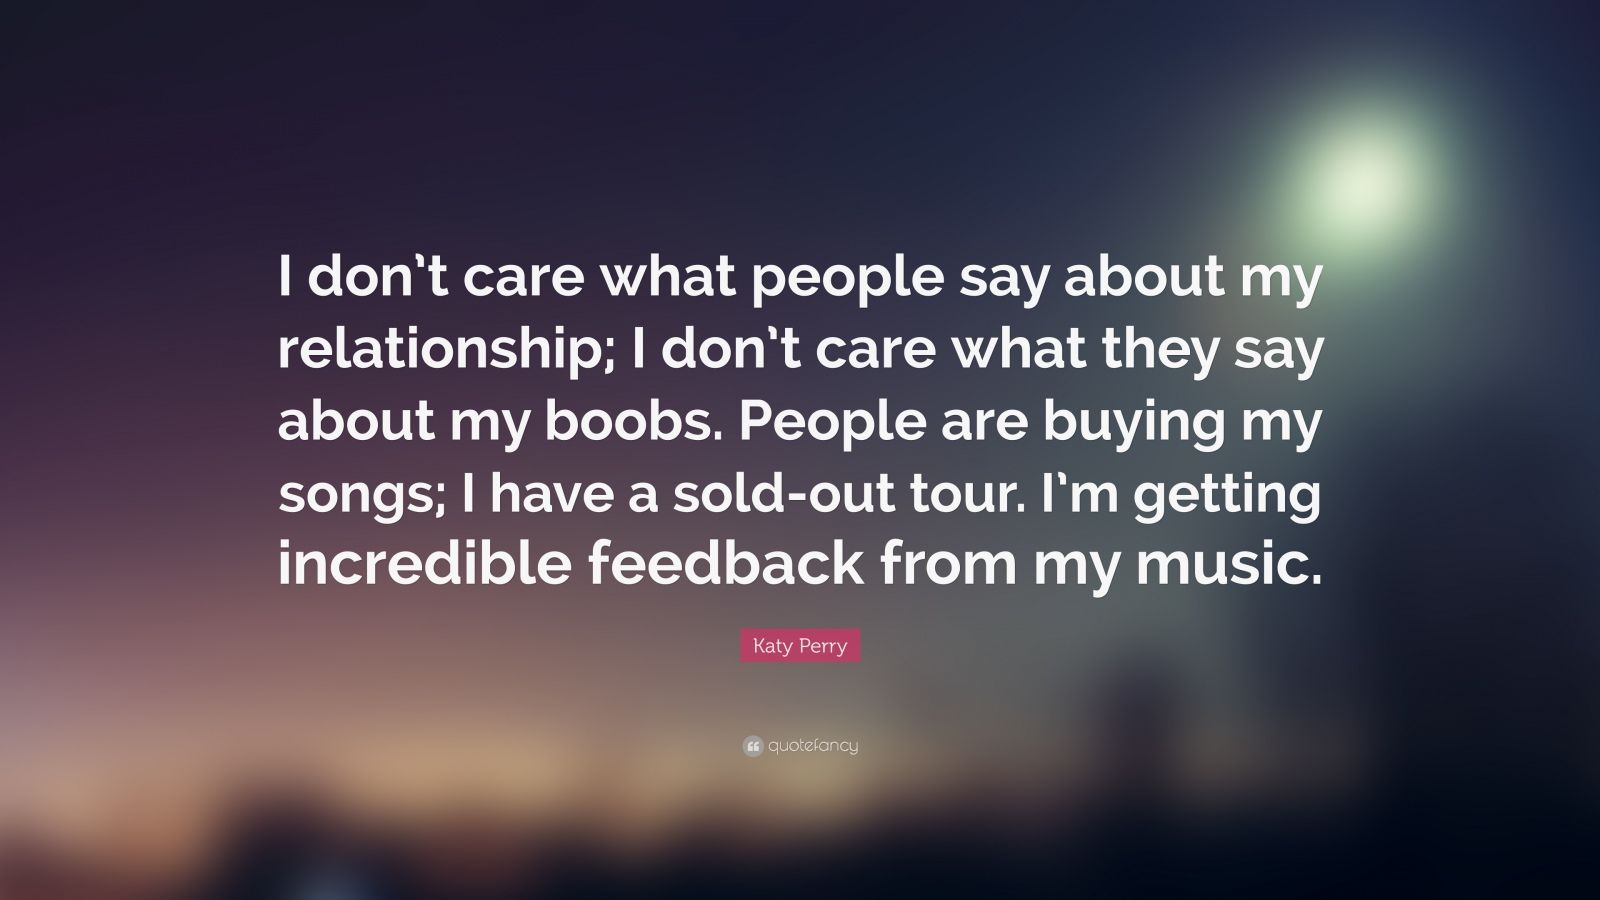 Katy Perry Quote: “I don’t care what people say about my relationship; I don’t ...